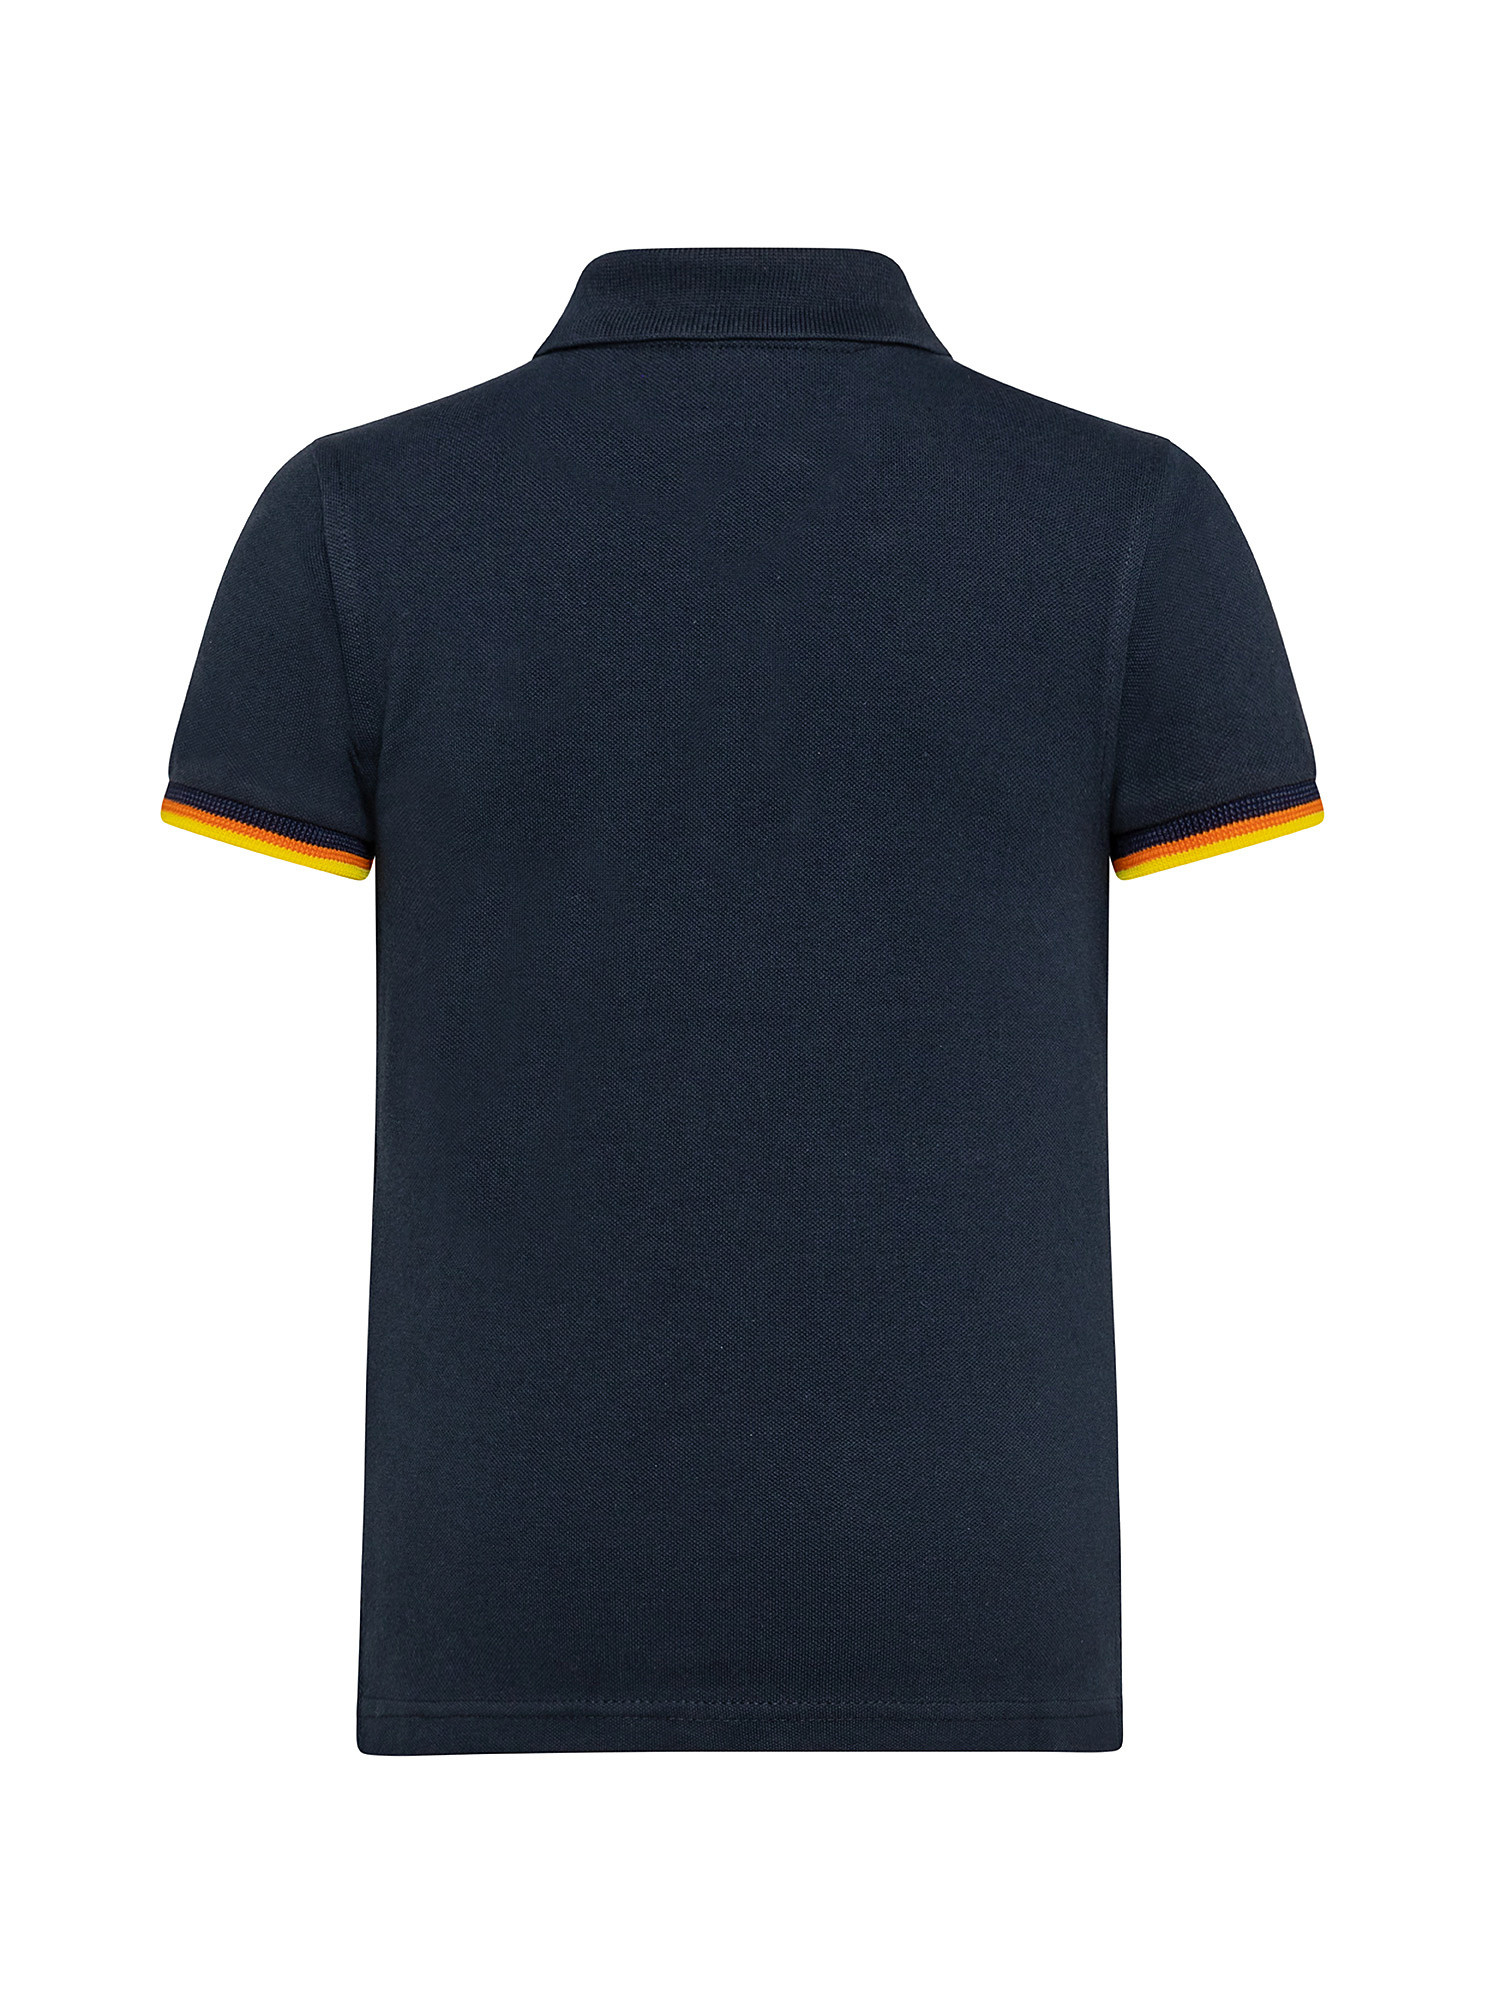 Polo bambino slim fit, Blu, large image number 1